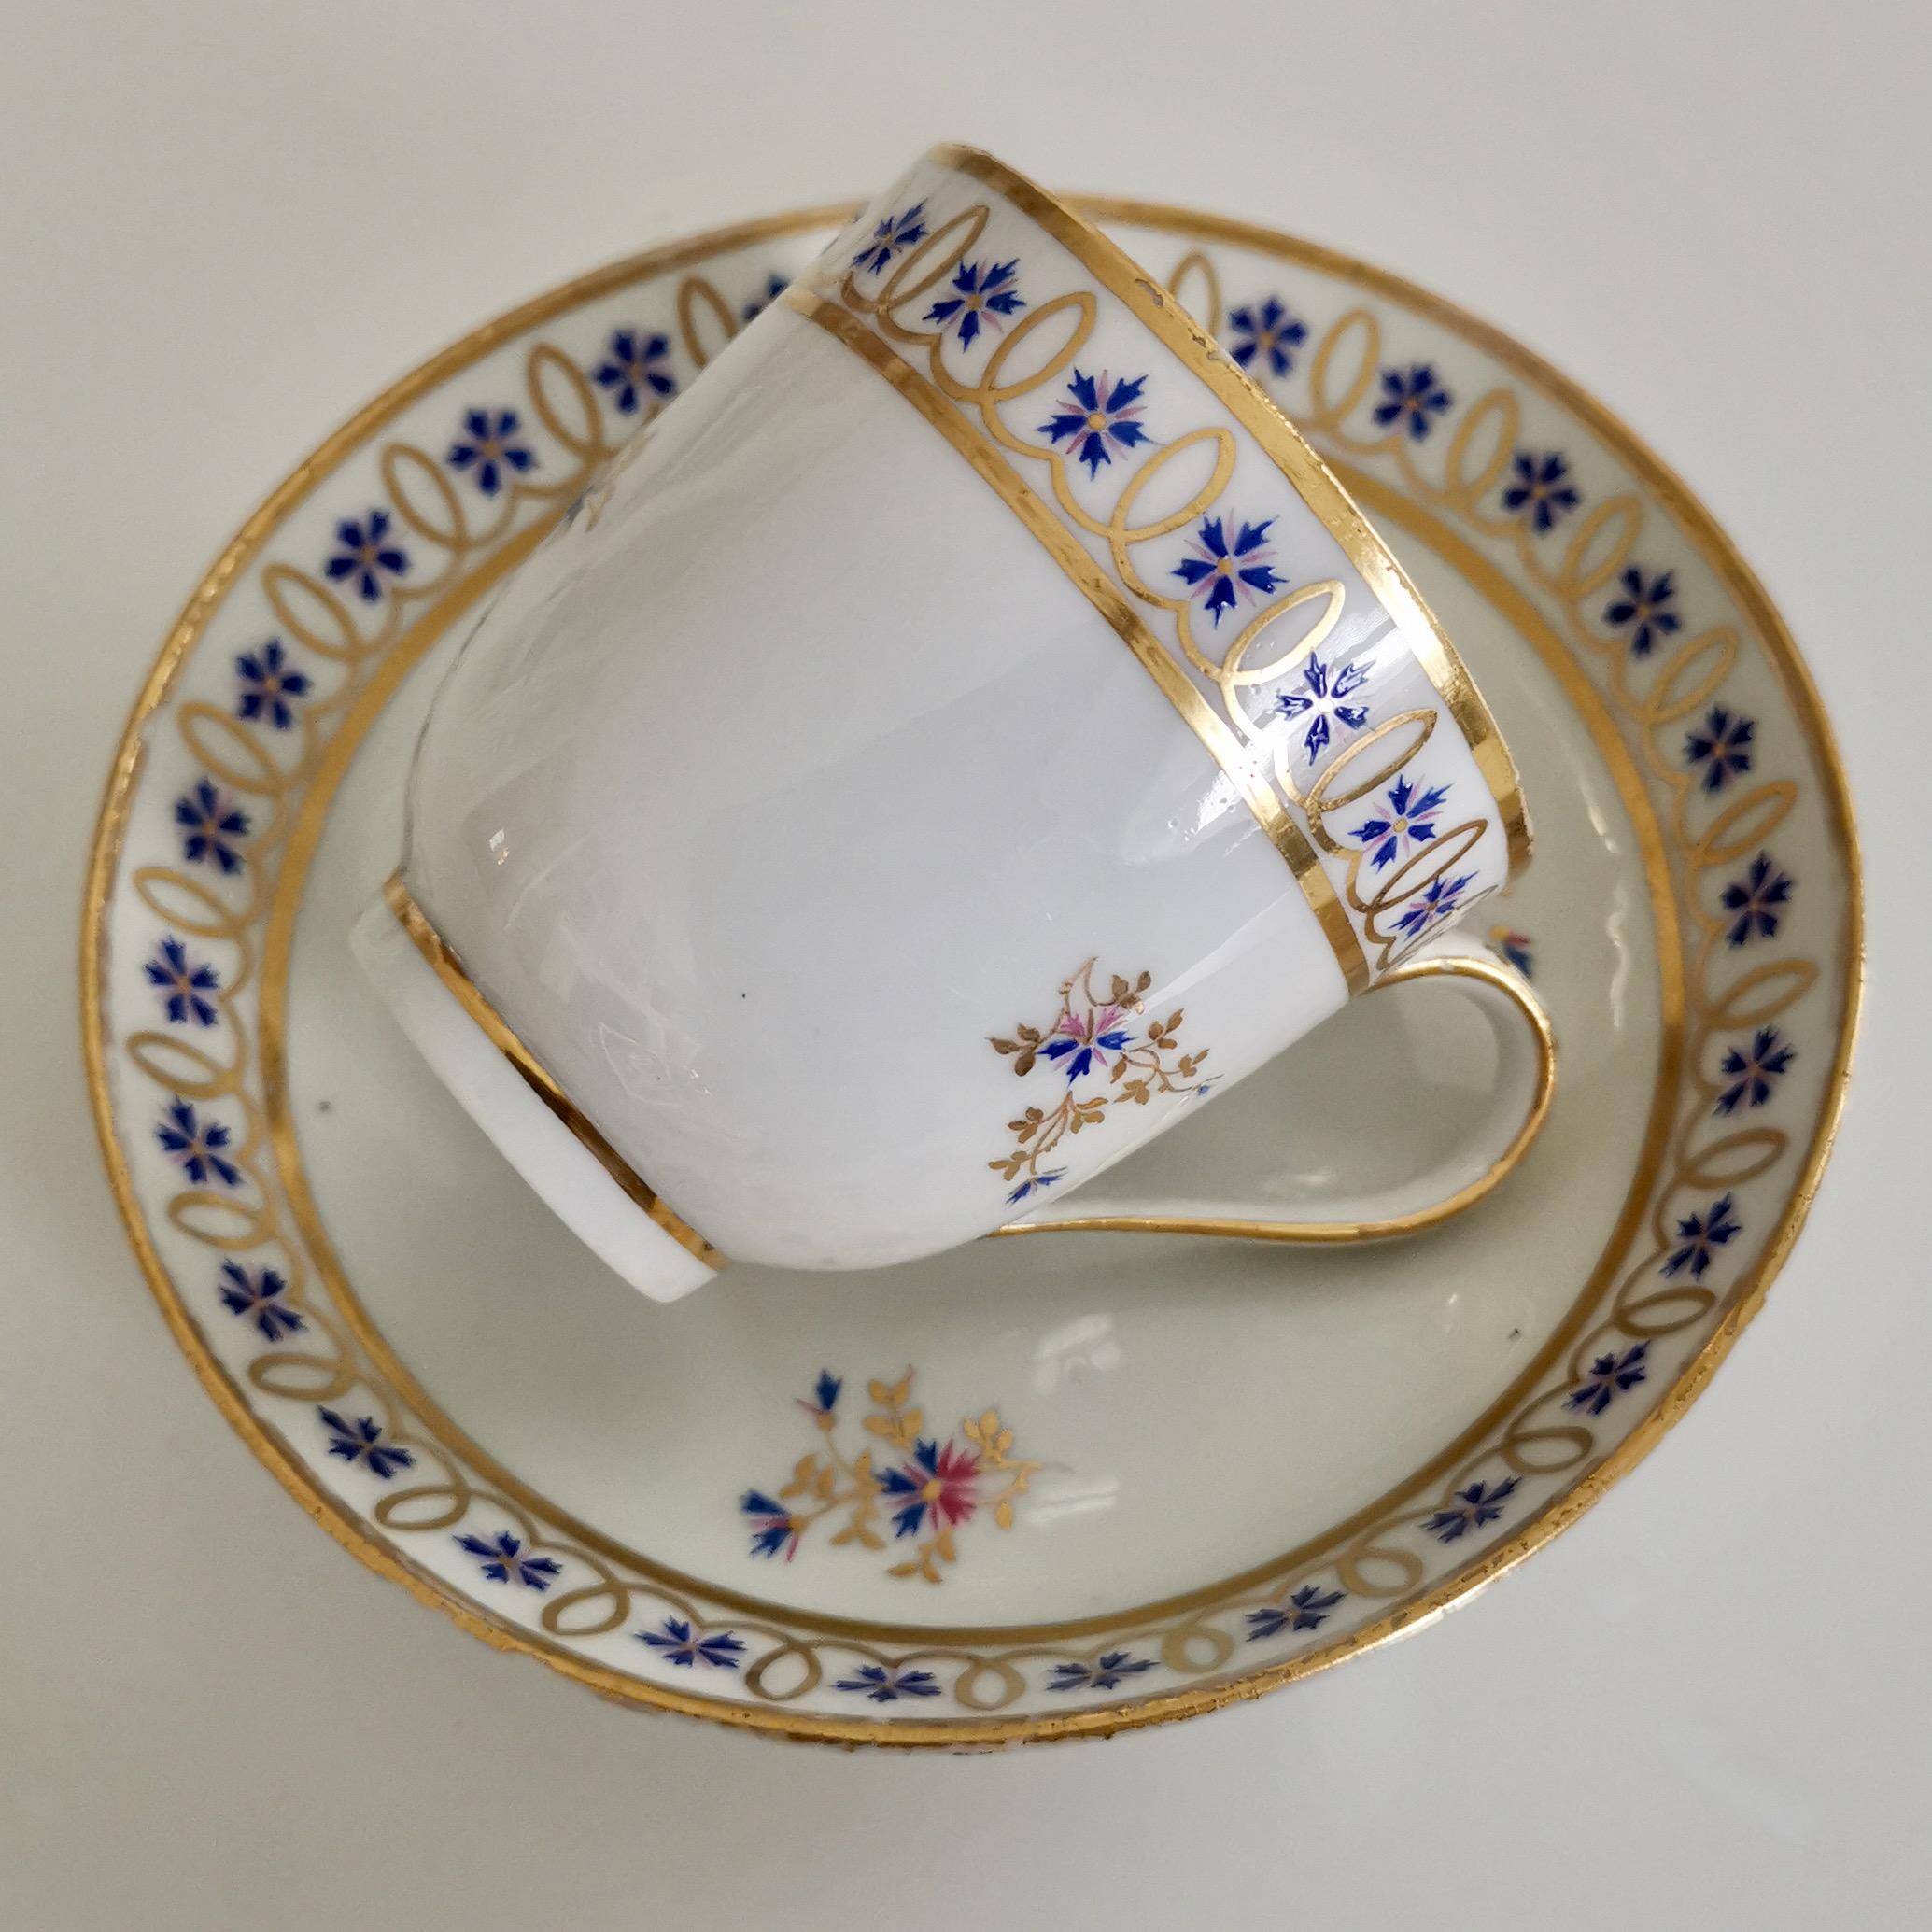 English Crown Derby Porcelain Coffee Cup, White, Gilt with Blue Cornflowers, 1782-1790